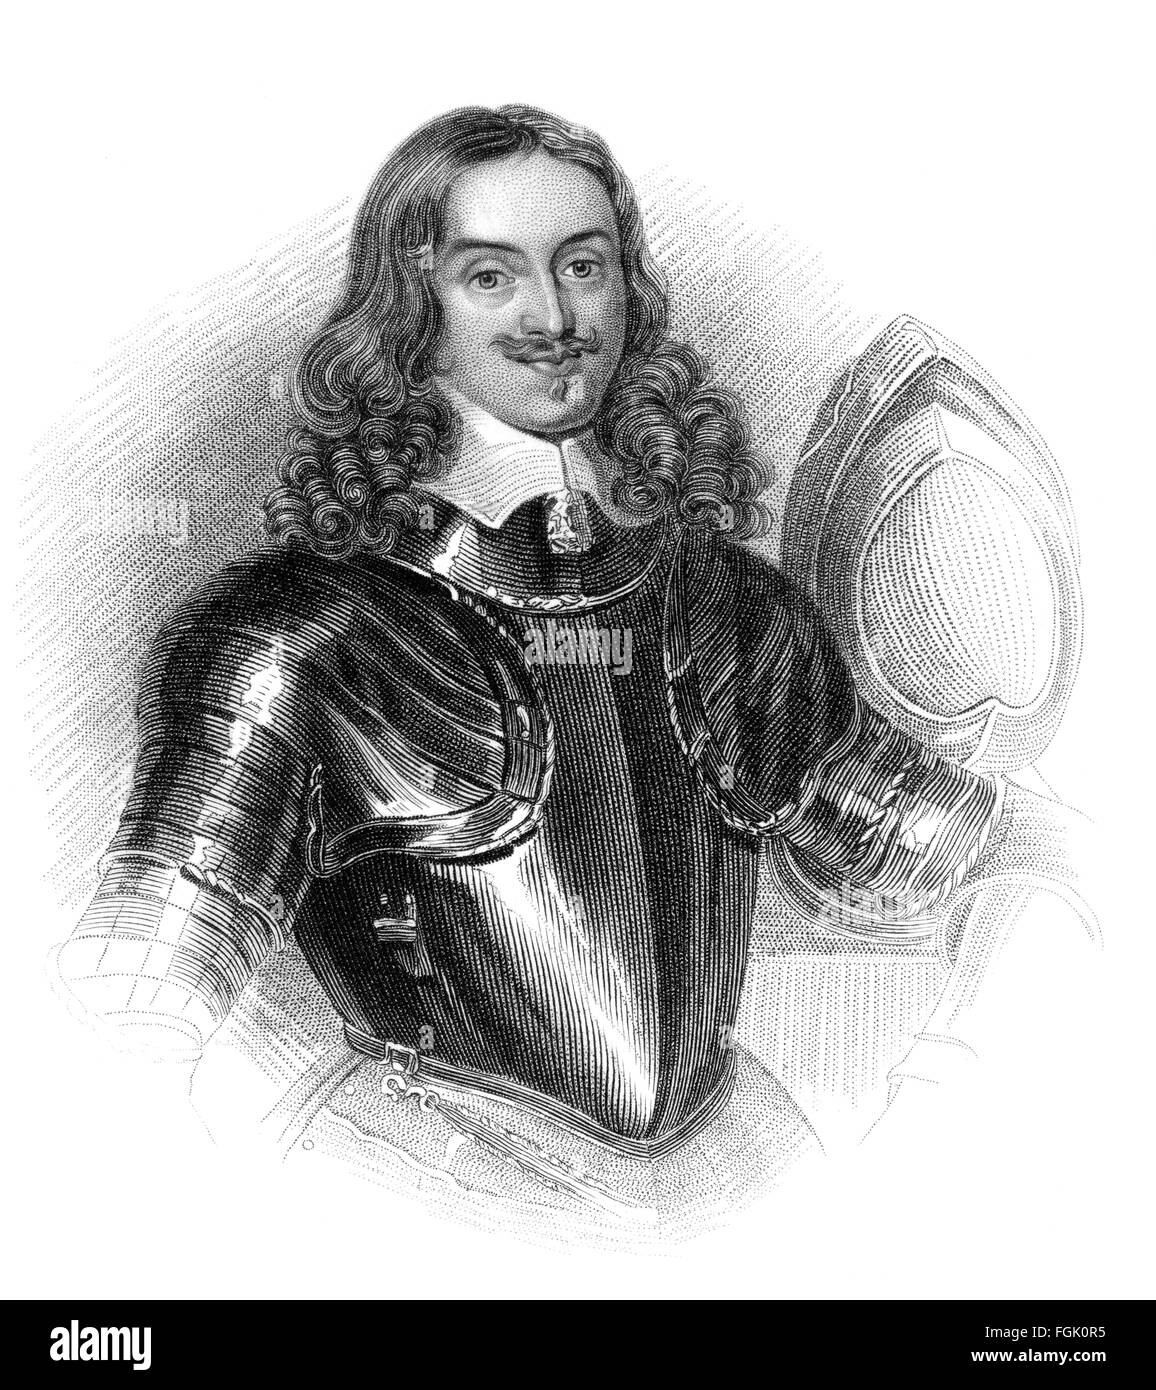 Edward Somerset, 2nd Marquess of Worcester, styled Lord Herbert of Raglan, 1602 or 1603-1667, an English nobleman involved in ro Stock Photo